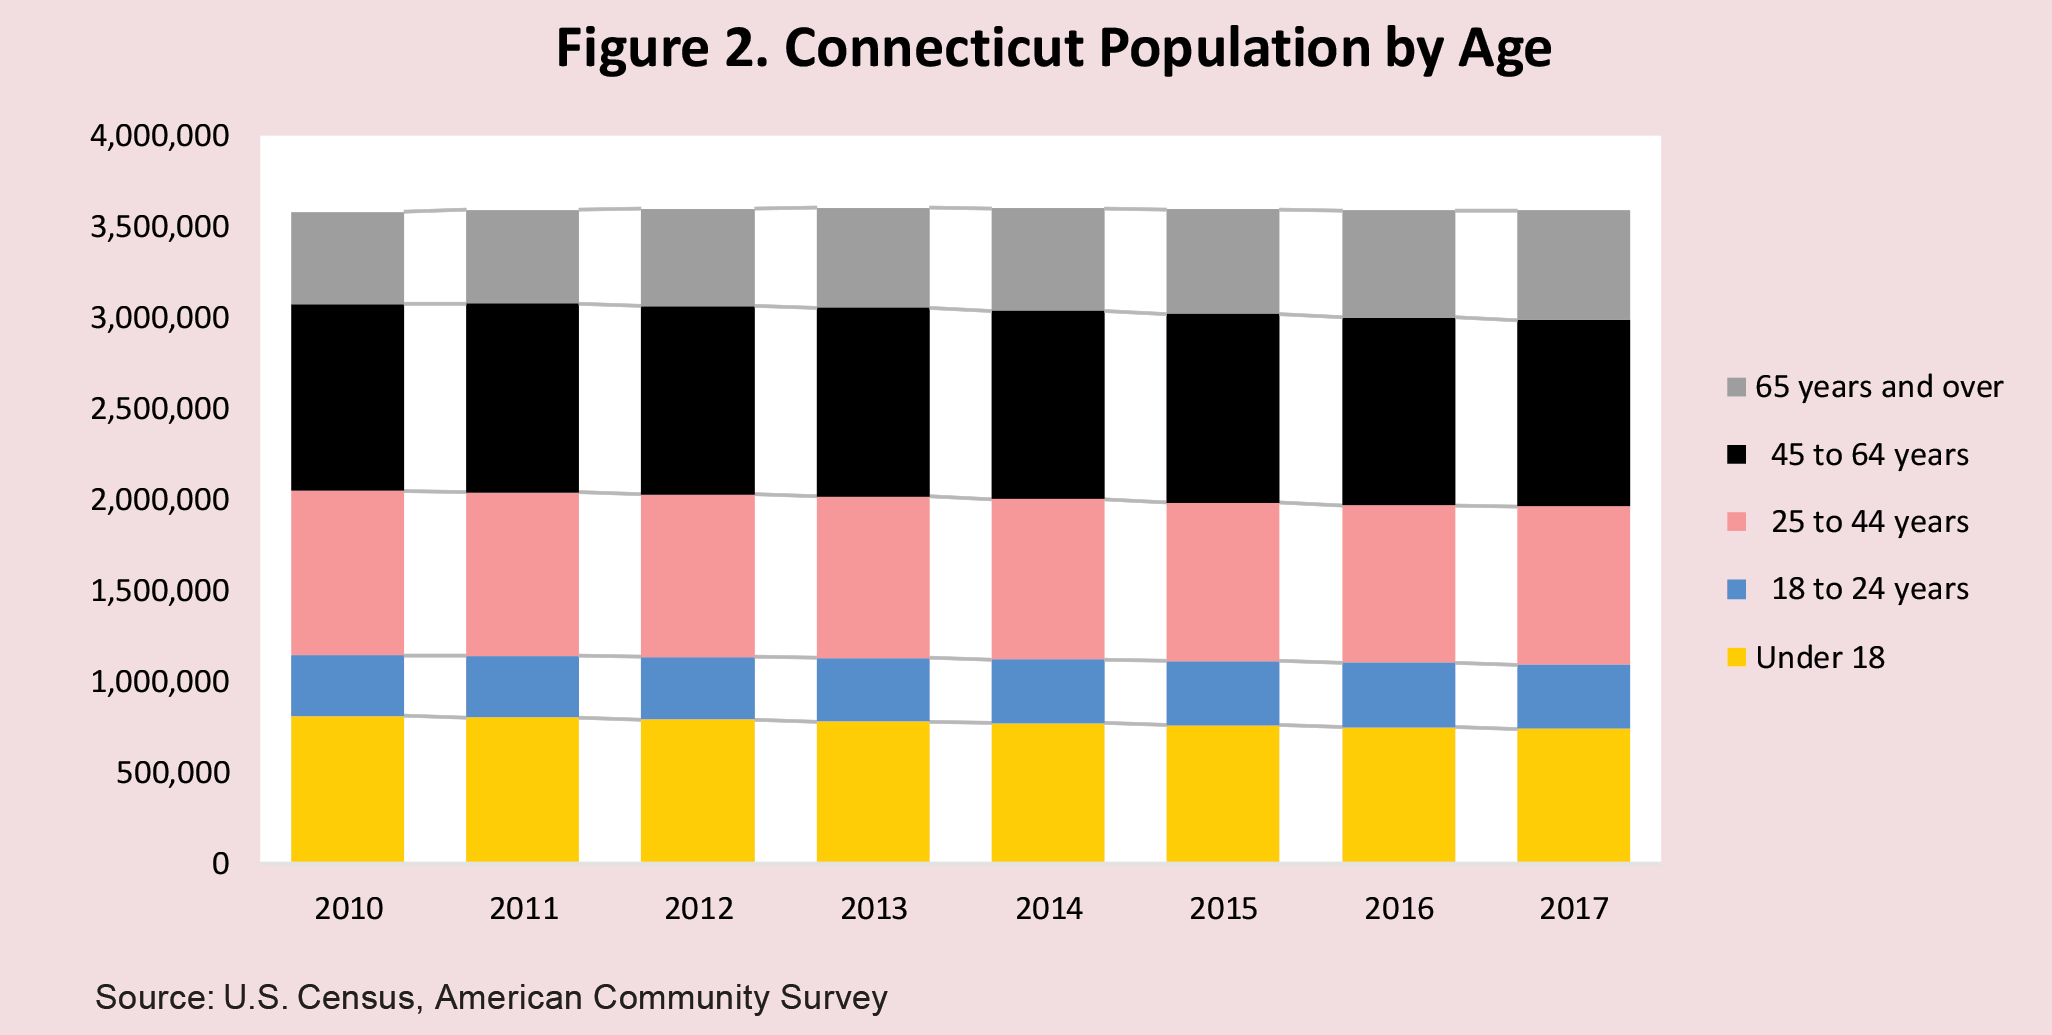 Figure 2. Connecticut Population by Age